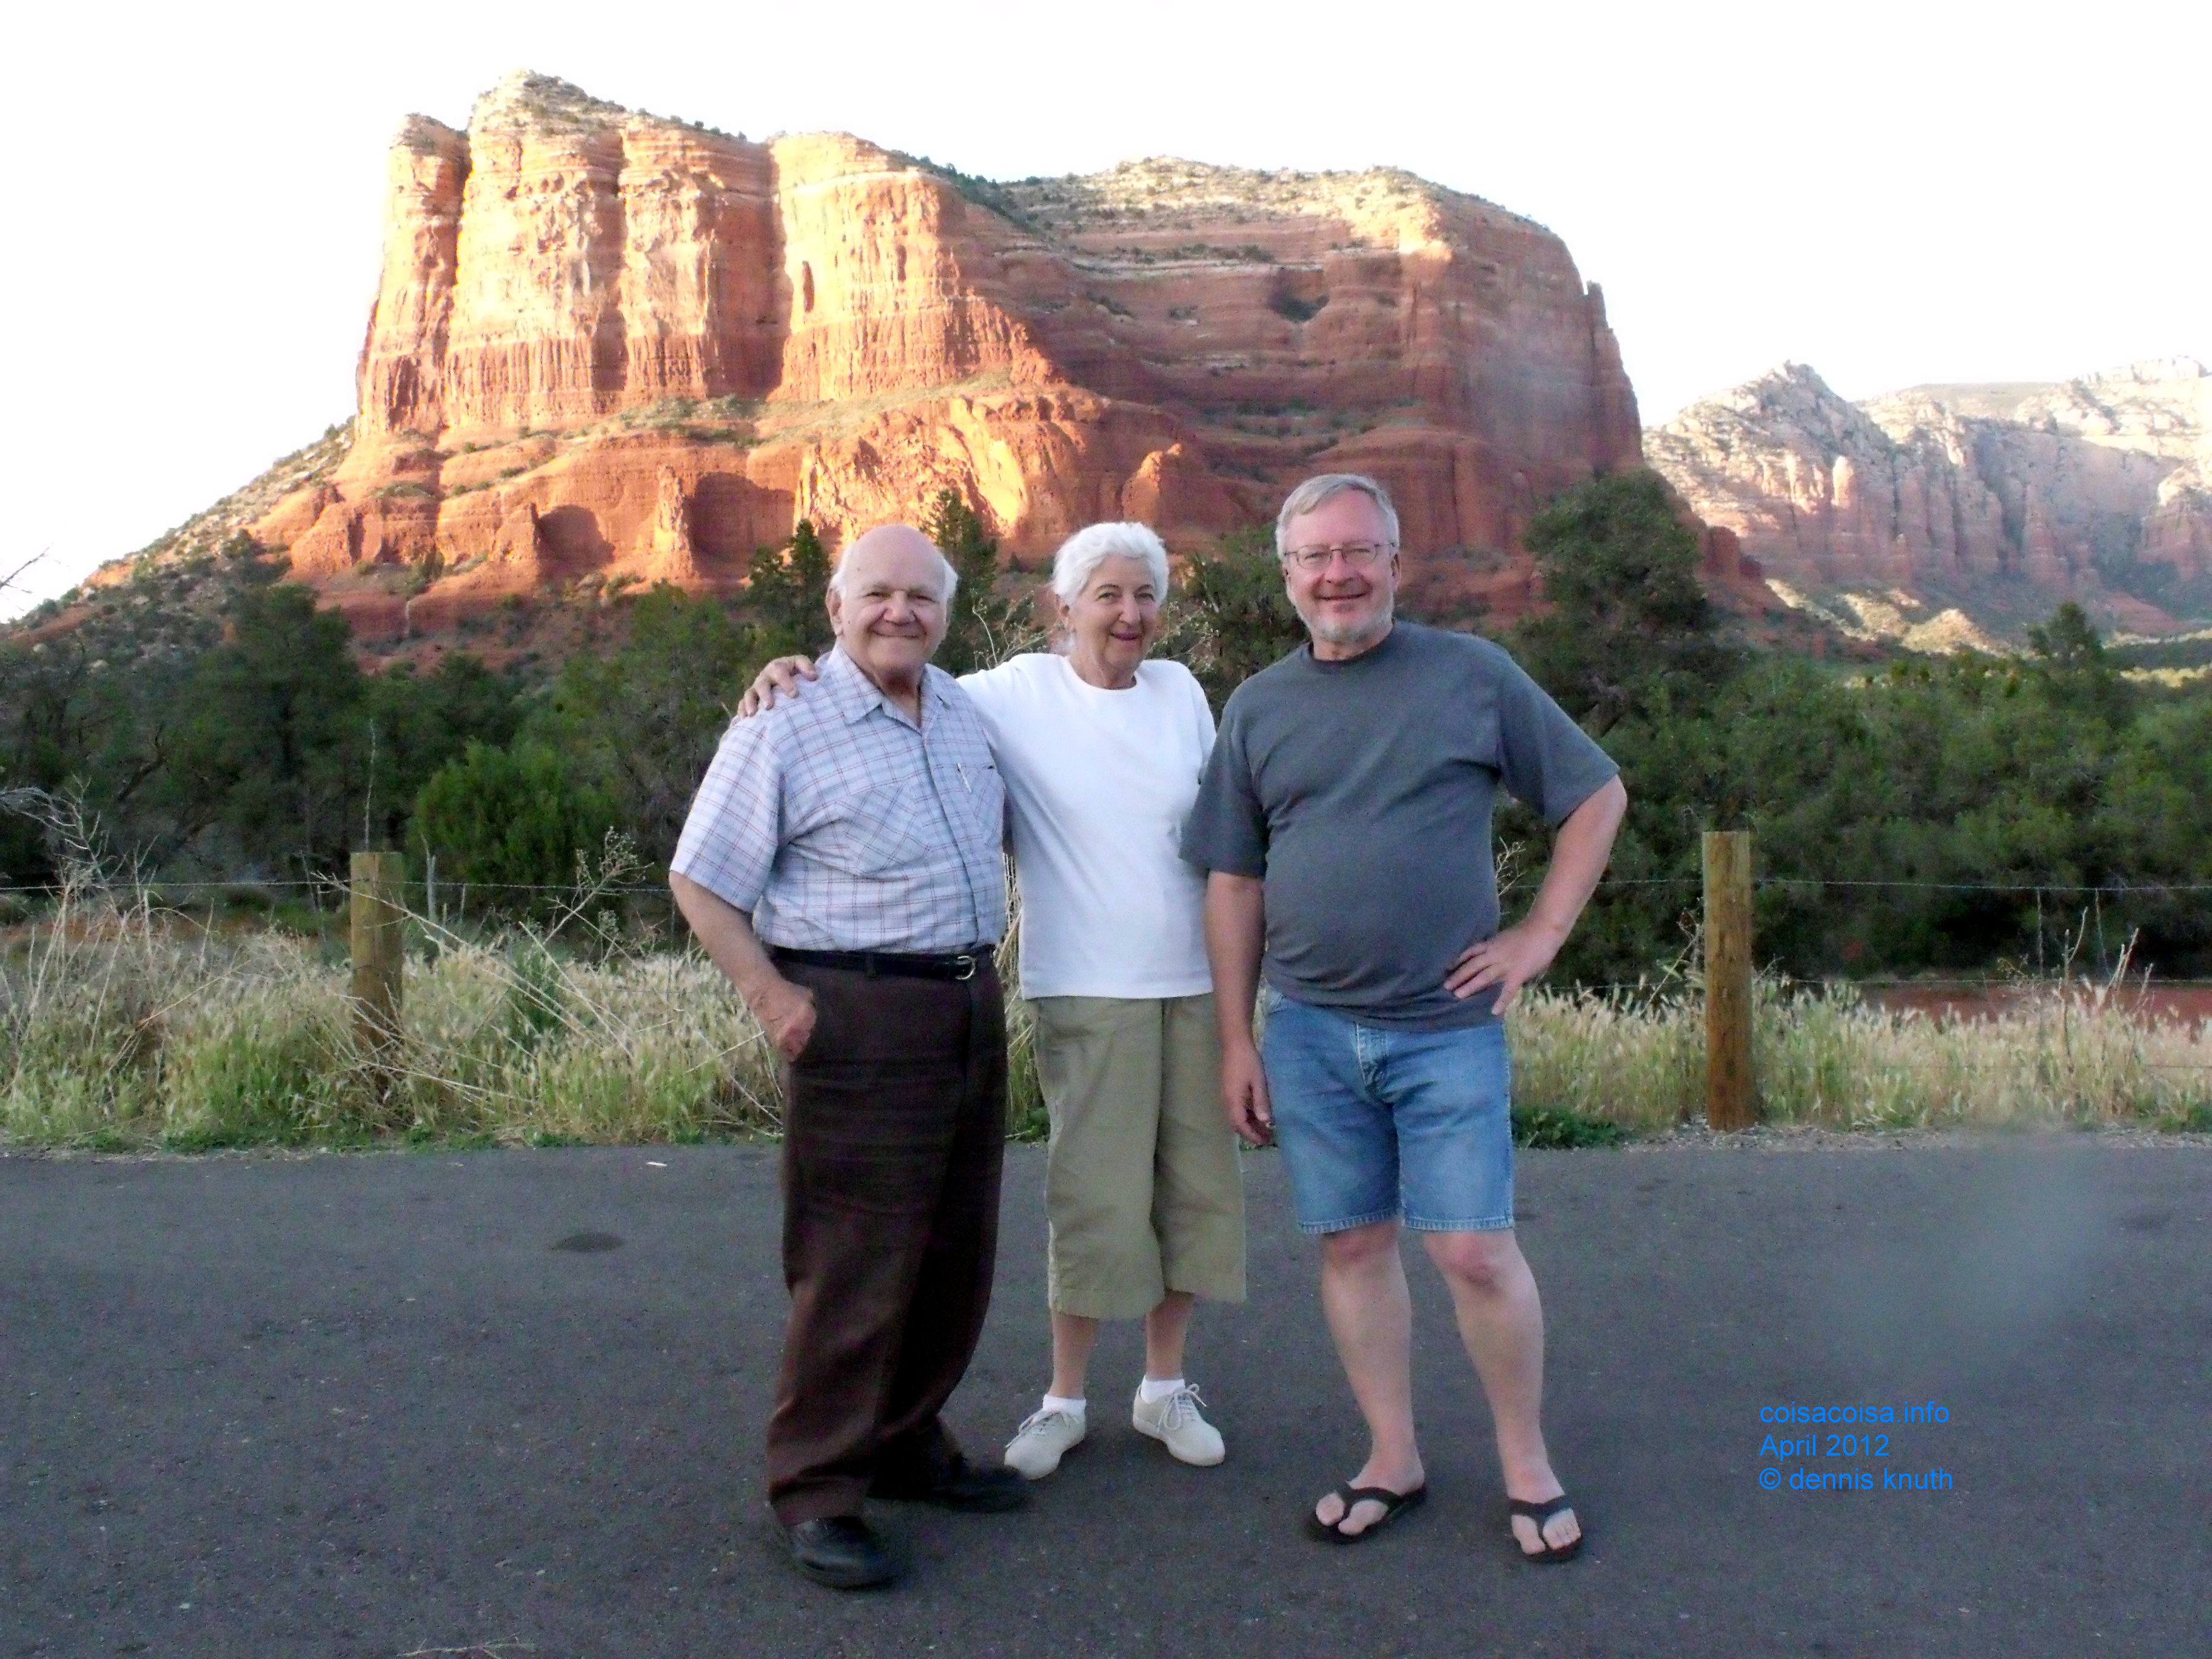 Orestus, Stella and Dennis Knuth in the Sedona Parking lot